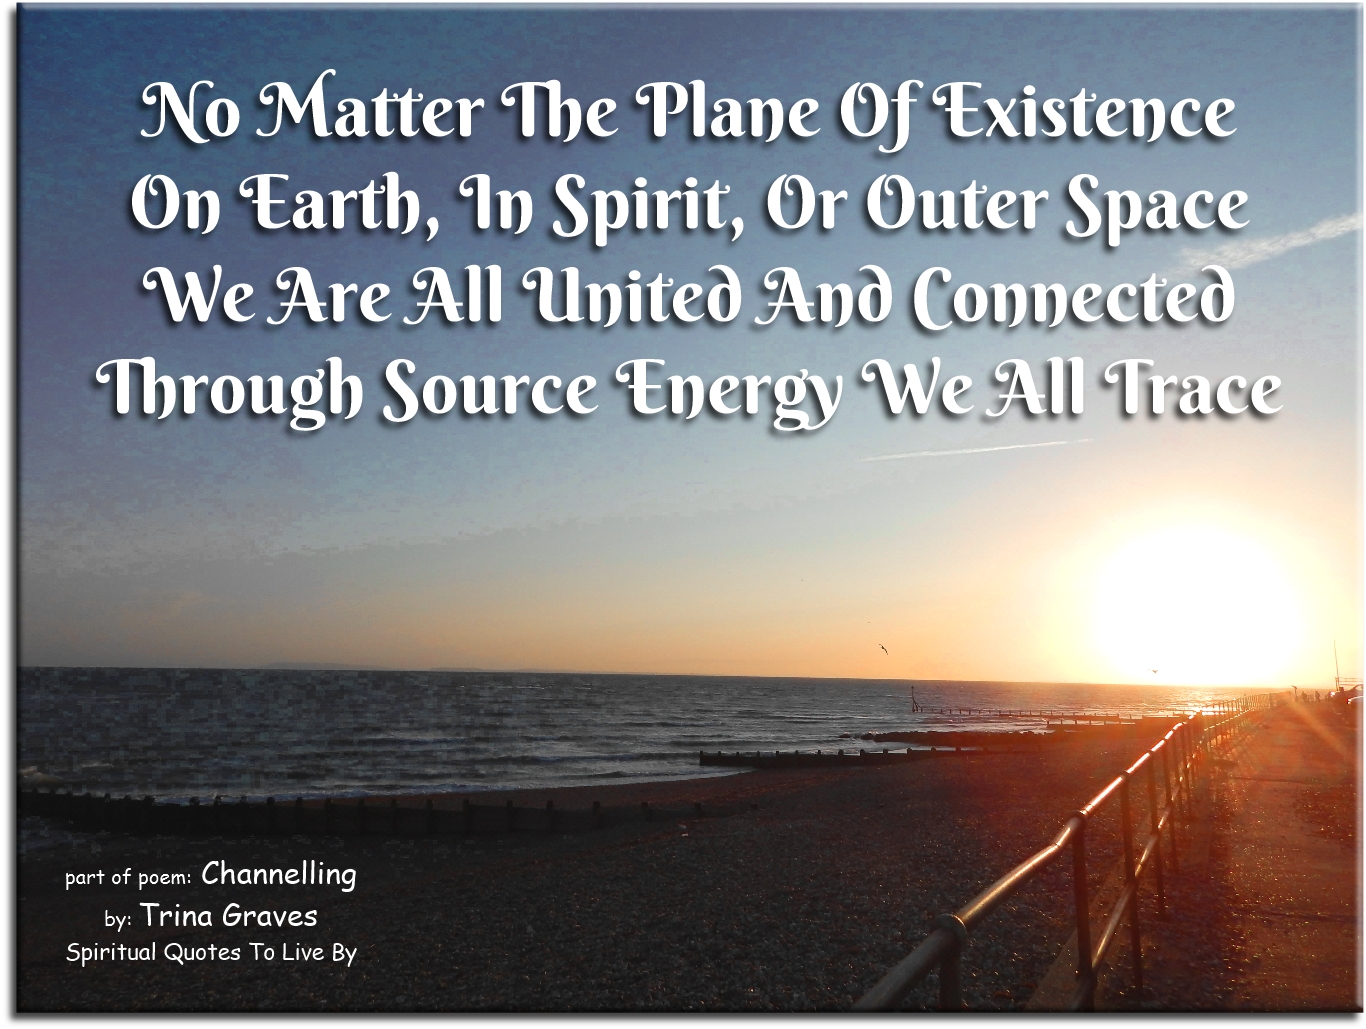 quote from poem: Channelling by Trina Graves of Spiritual Quotes To Live By